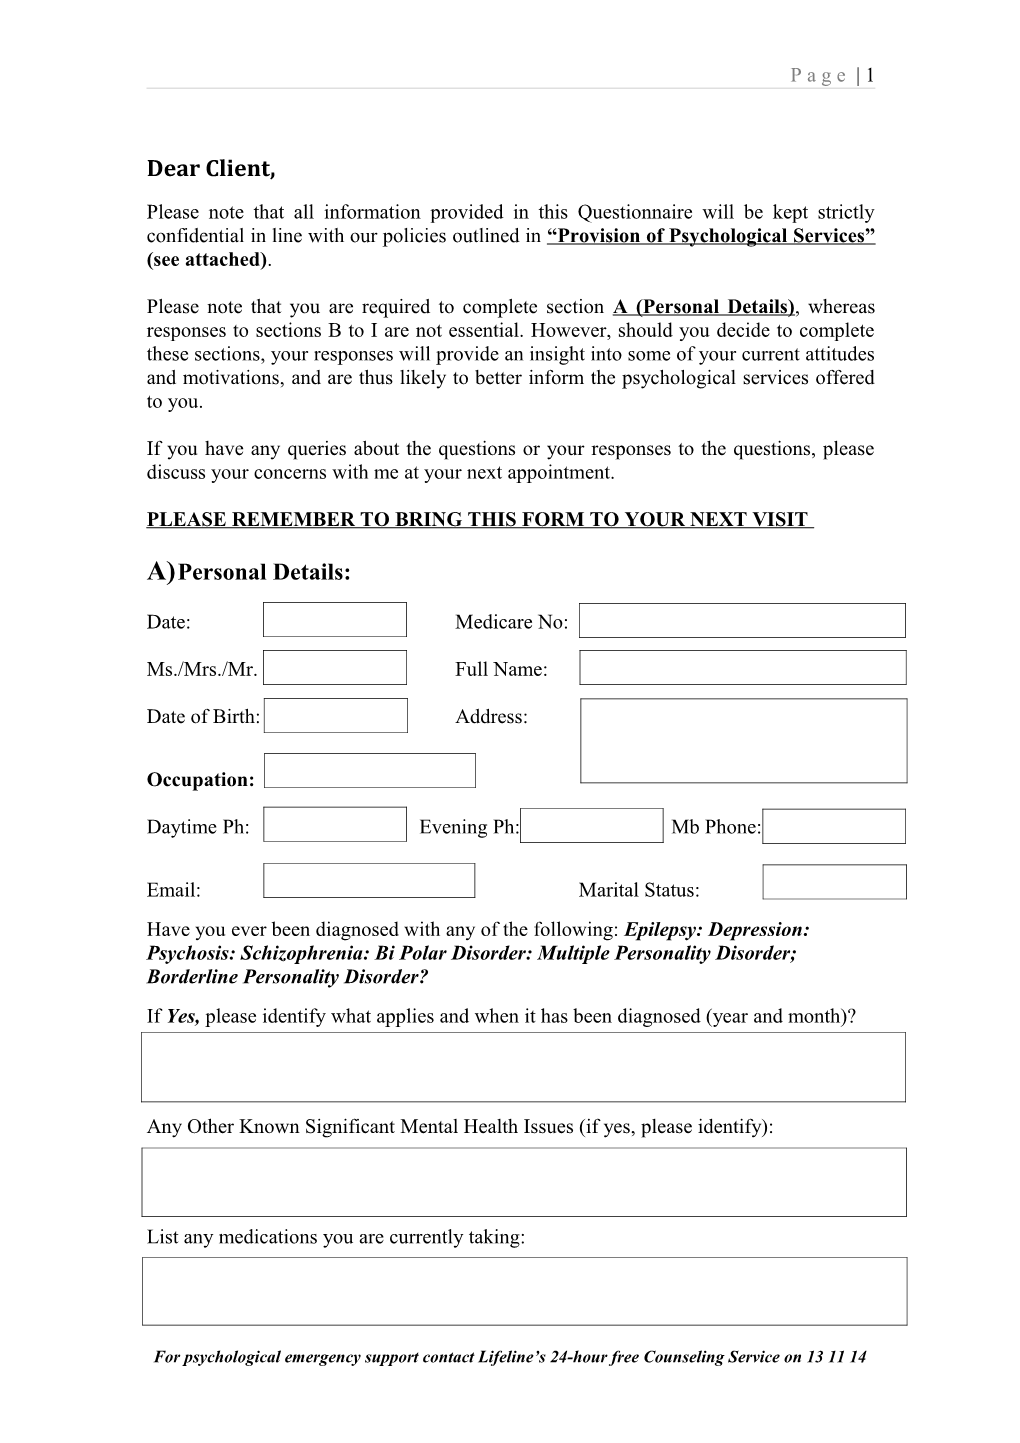 Please Remember to Bring This Form to Your Next Visit